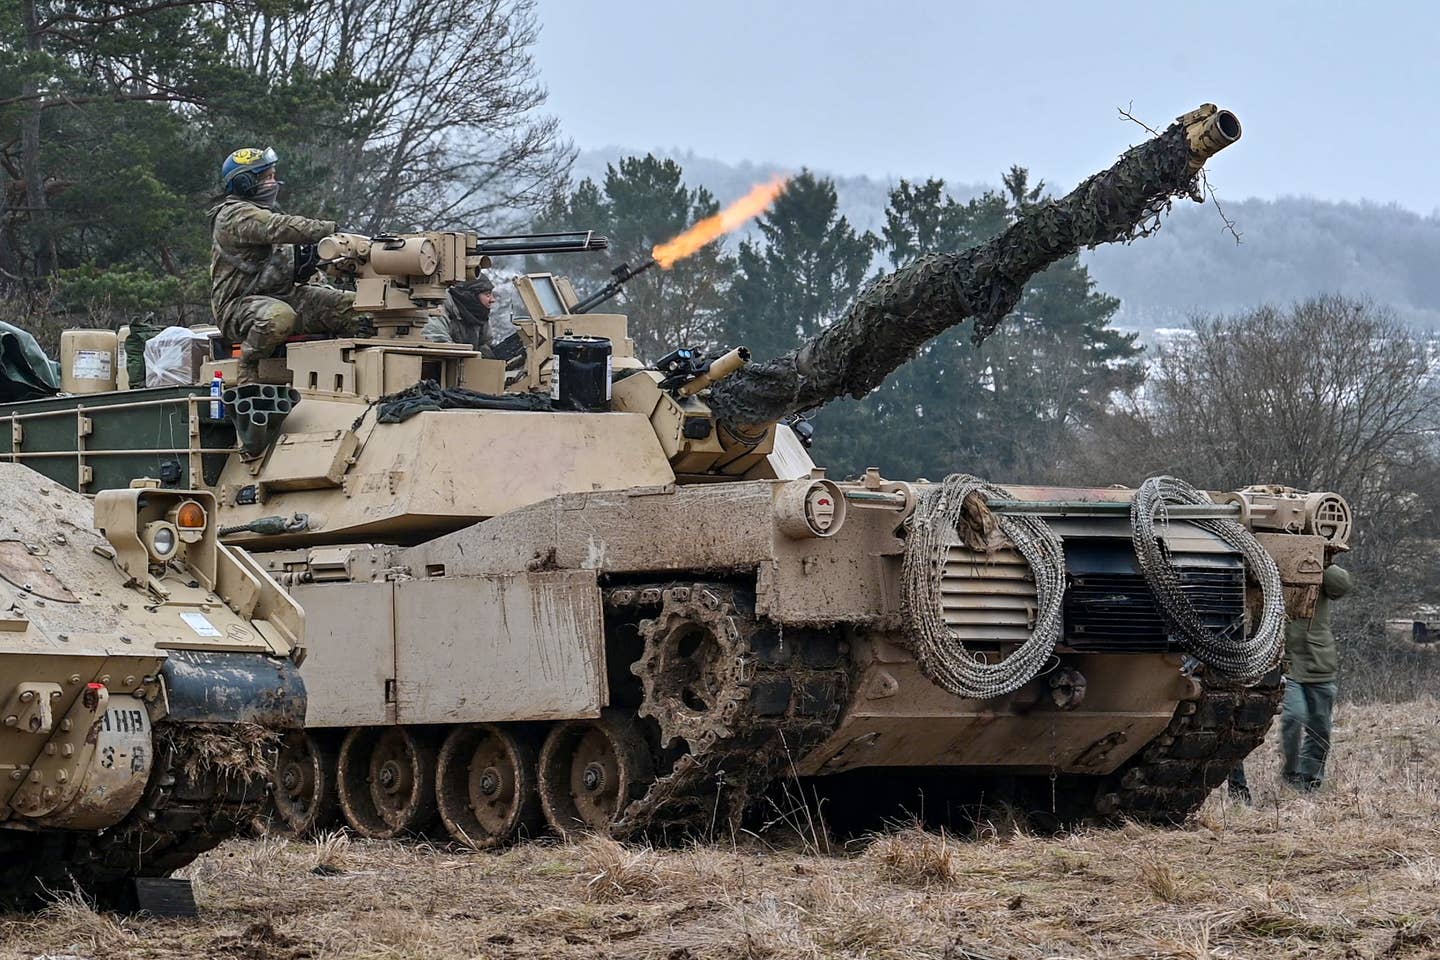 An M1 Abrams main battle tank takes part in the international military exercise Allied Spirit 2022 at the Hohenfels training area. <em>Photo by Armin Weigel/picture alliance via Getty Images</em>